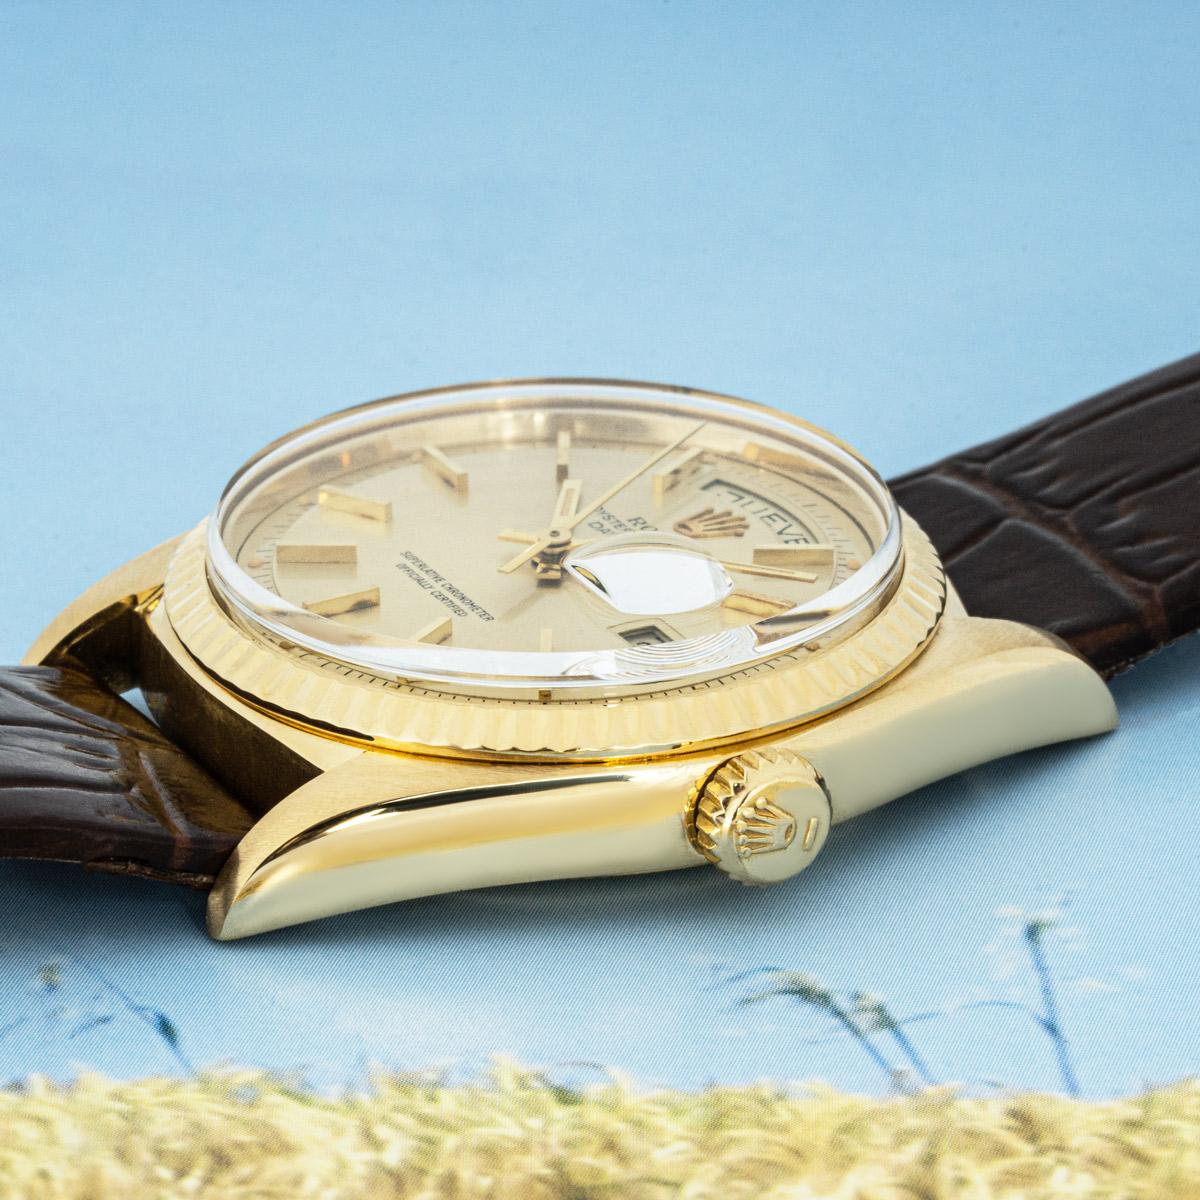 A 36mm Day-Date by Rolex in yellow gold. Featuring a champagne dial with applied hour markers and a fluted yellow gold bezel. Fitted with a plexiglass and a self-winding automatic movement. The watch is equipped with a generic brown leather strap